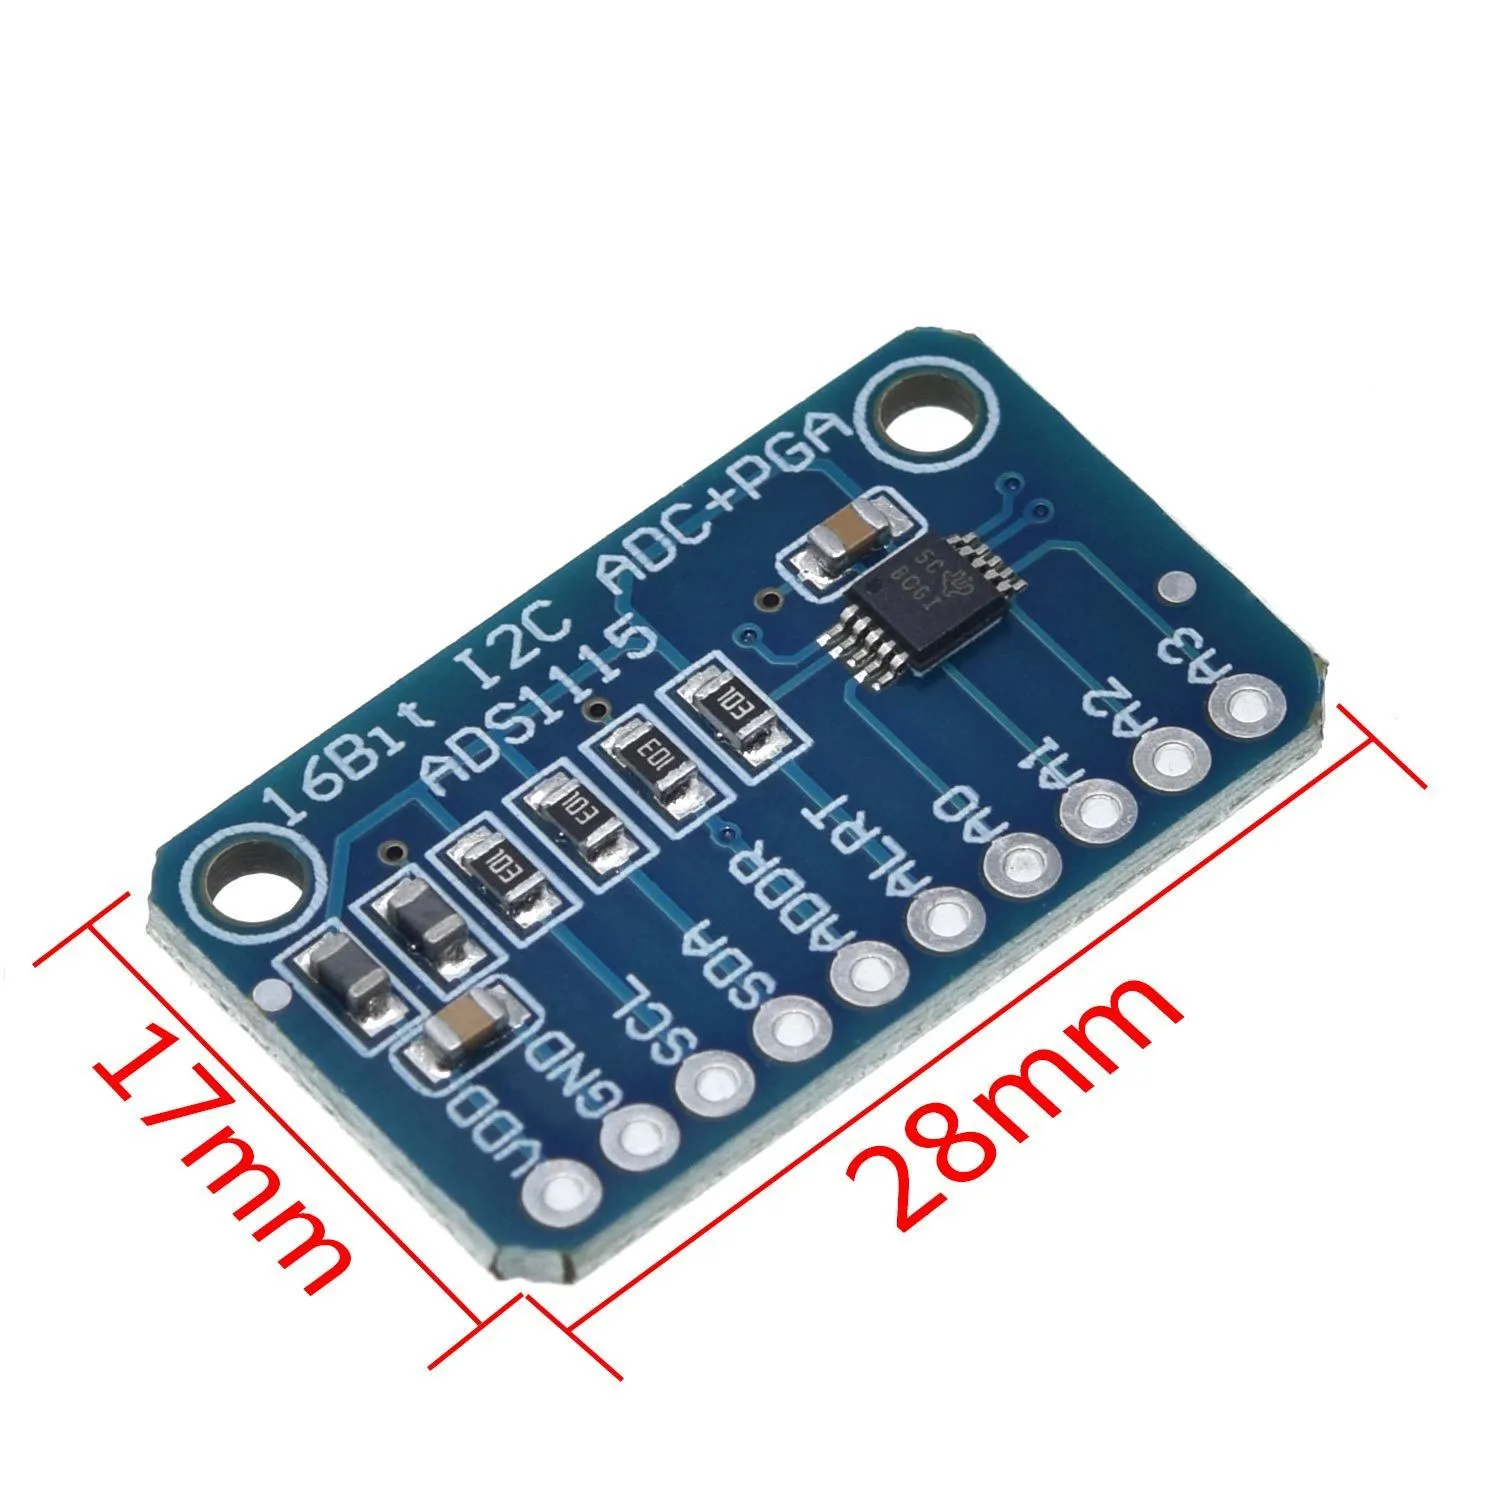 ADS1115 16 Bit I2C 4 Channel ADC modules with Pro RPI Gain Amplifier for Arduino